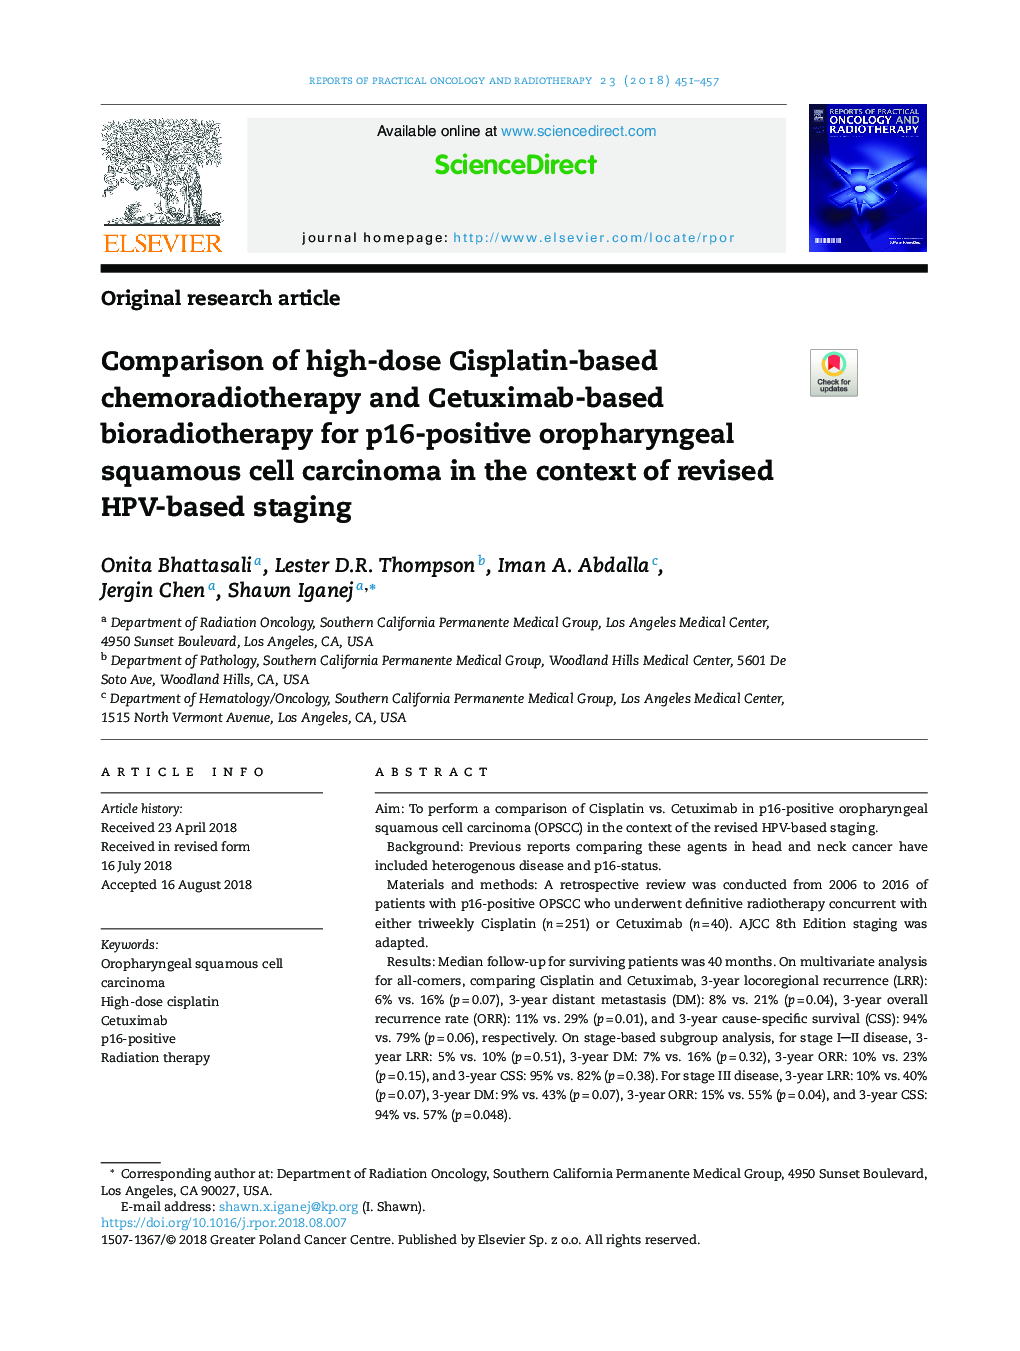 Comparison of high-dose Cisplatin-based chemoradiotherapy and Cetuximab-based bioradiotherapy for p16-positive oropharyngeal squamous cell carcinoma in the context of revised HPV-based staging